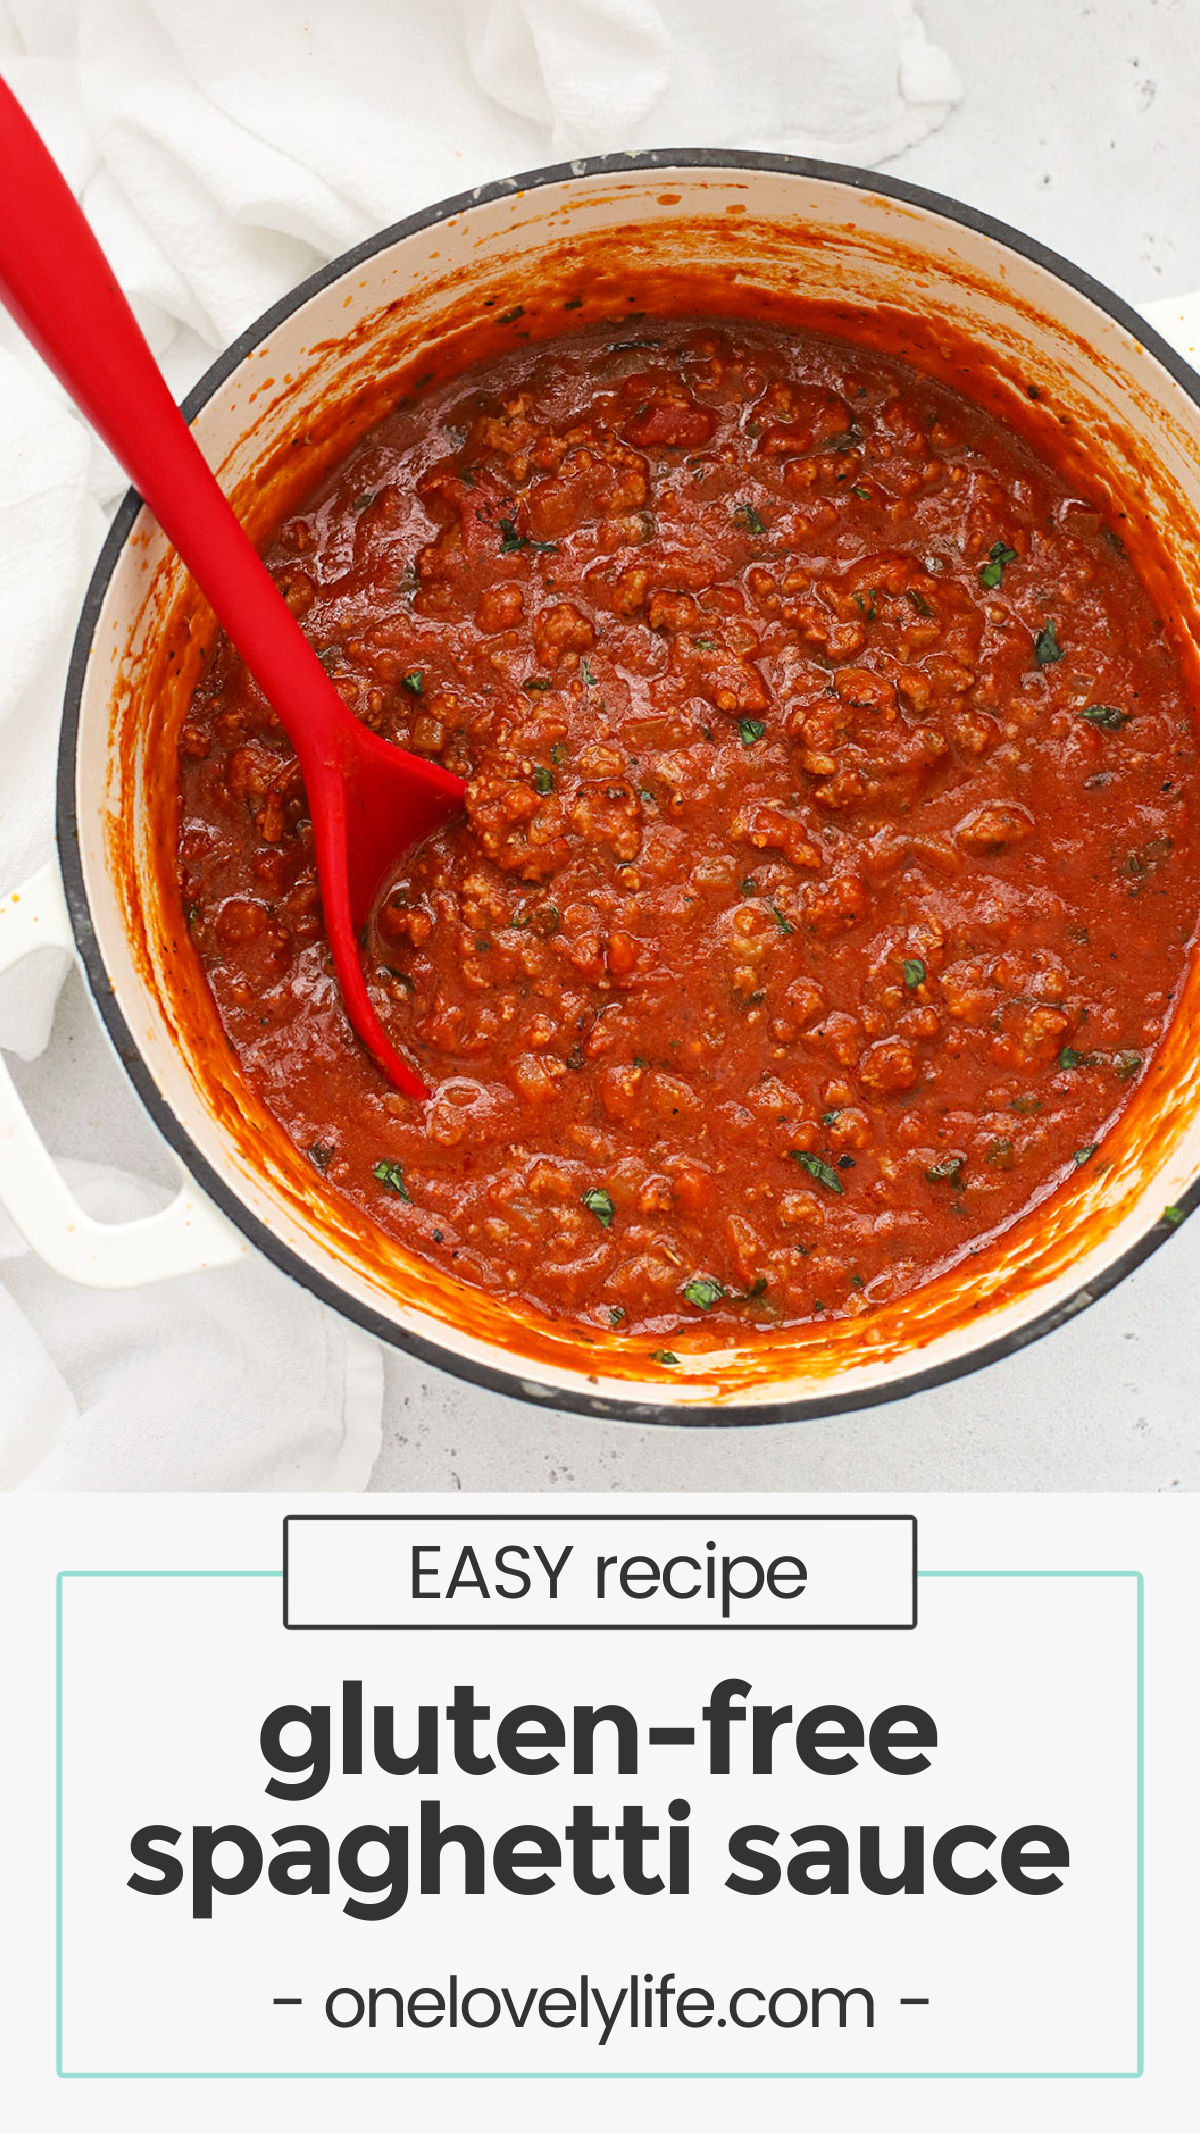 This gluten-free spaghetti sauce recipe is has all the classic flavor you crave. Perfect for feeding a crowd or freezing some for another day! // homemade gluten-free spaghetti sauce / gluten-free meat sauce for spaghetti / gluten-free spaghetti sauce brands / gluten-free spaghetti sauce from scratch / gluten-free pasta recipe / gluten-free spaghetti recipe / gluten-free spaghetti dinner / gluten-free freezer meal